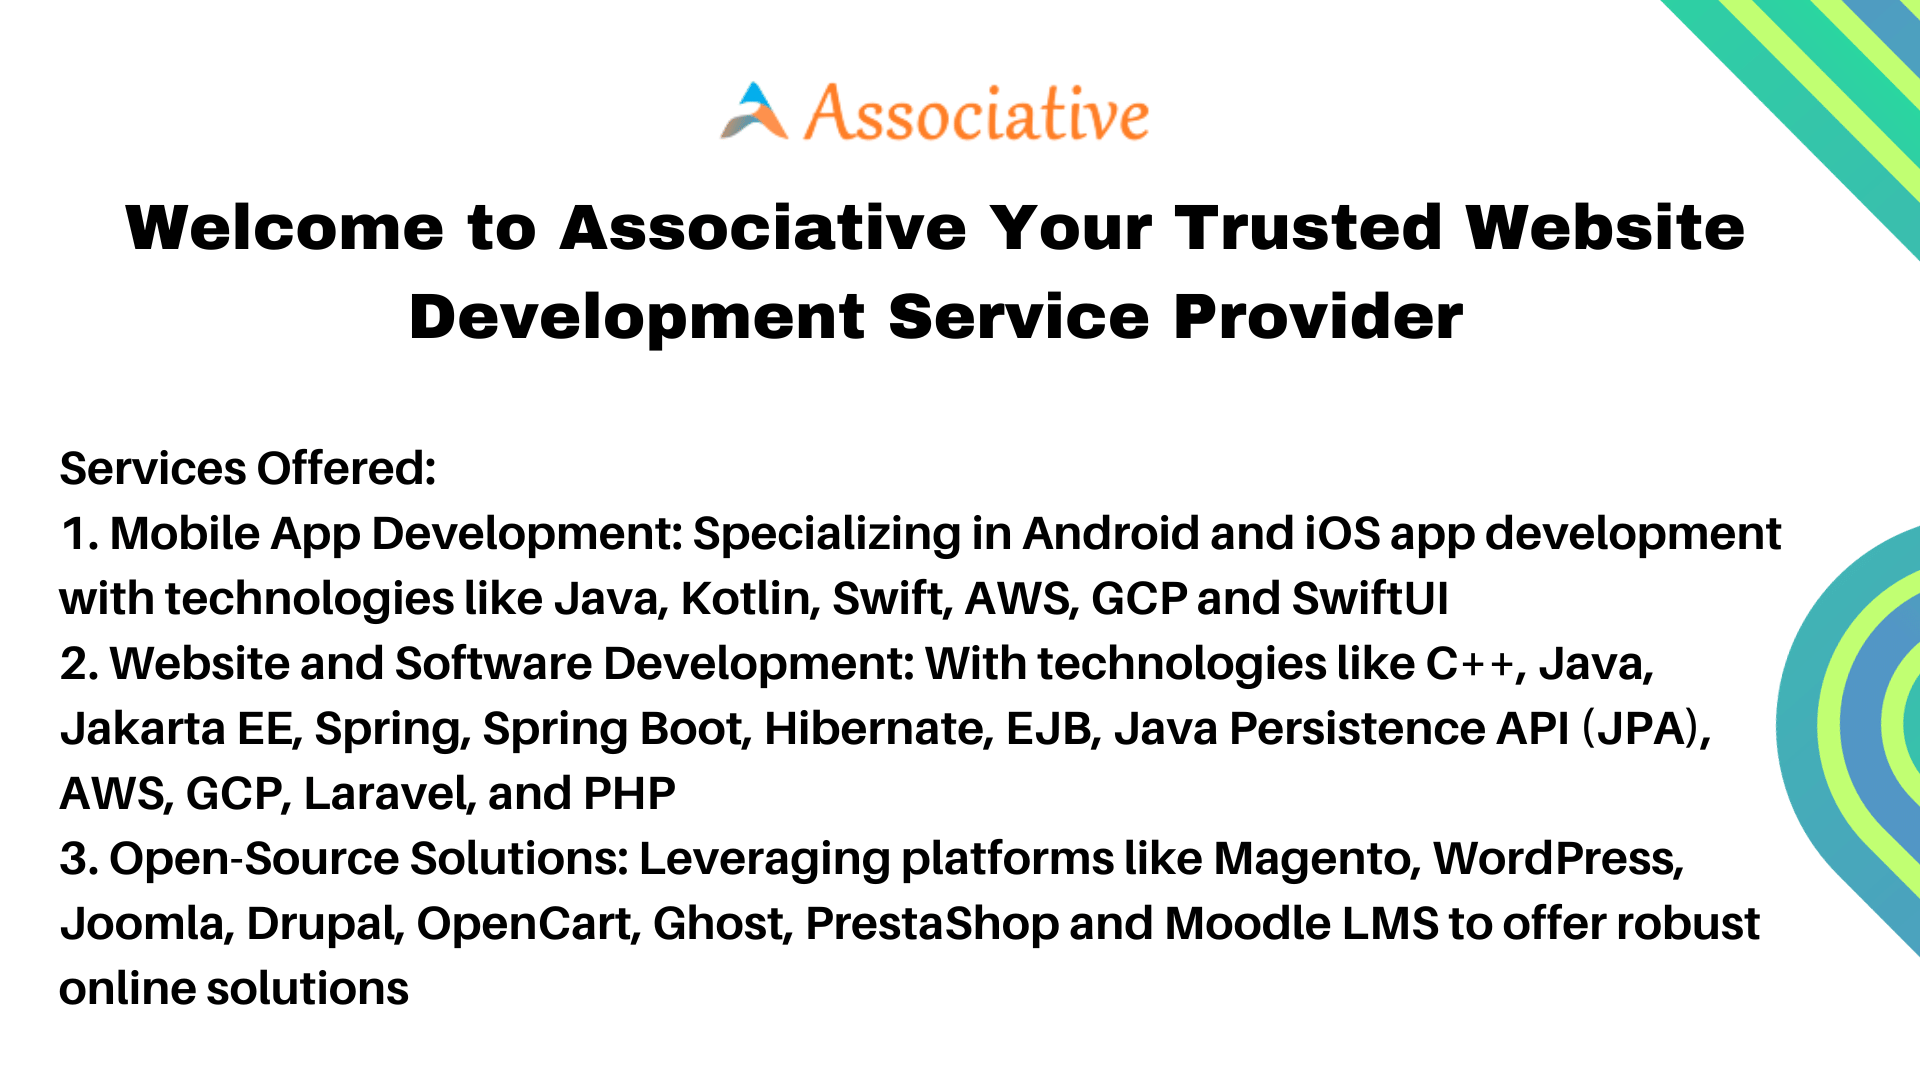 Welcome to Associative Your Trusted Website Development Service Provider